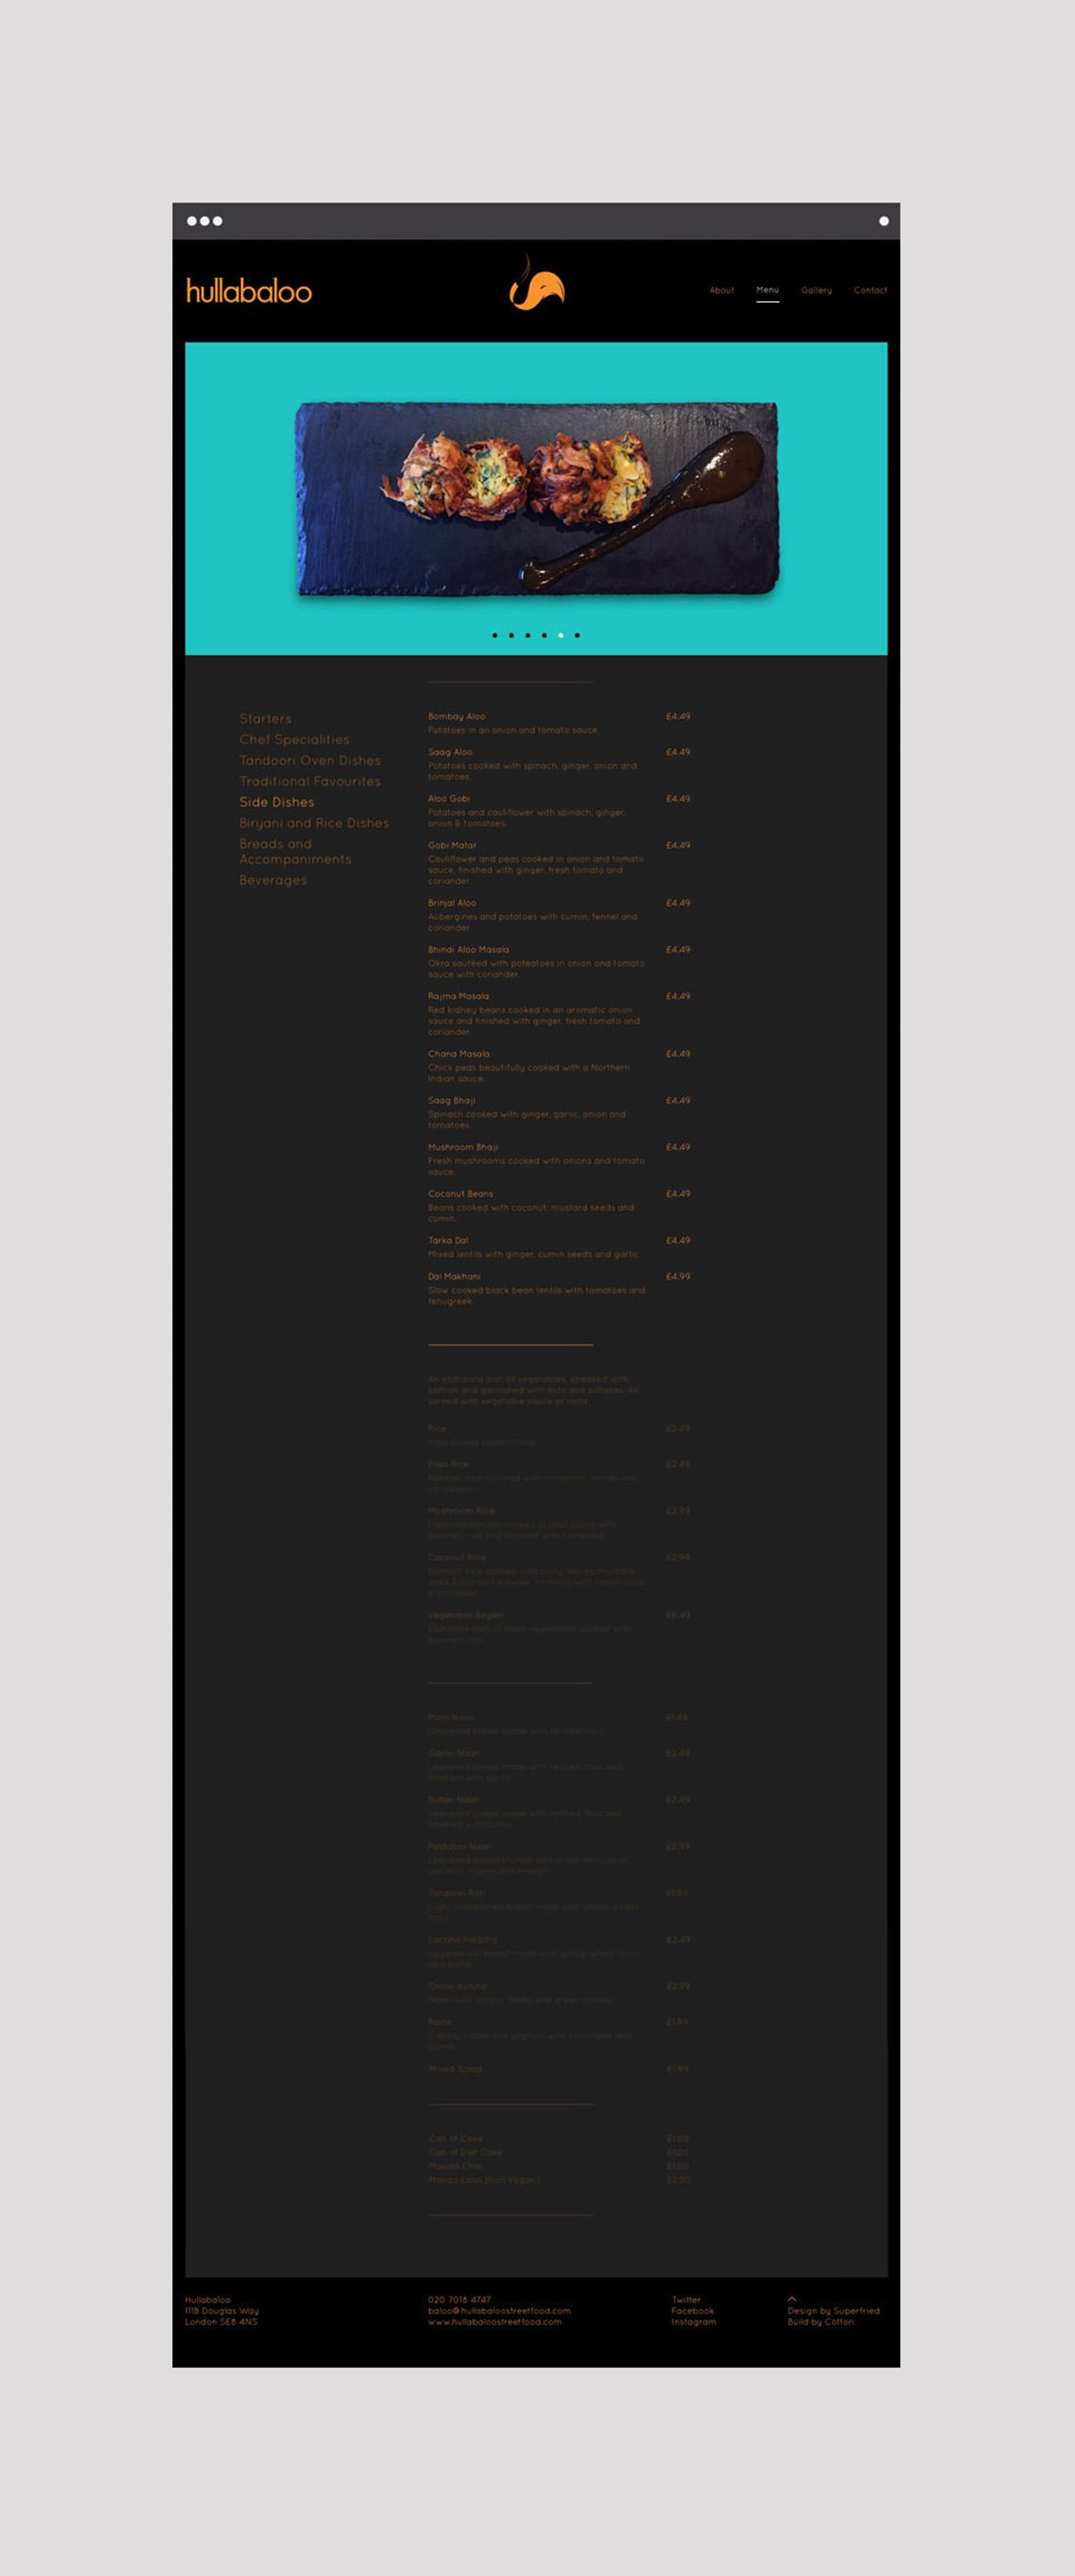 Hullabaloo. Menu page. Website design by Superfried. Developed by Cotton.